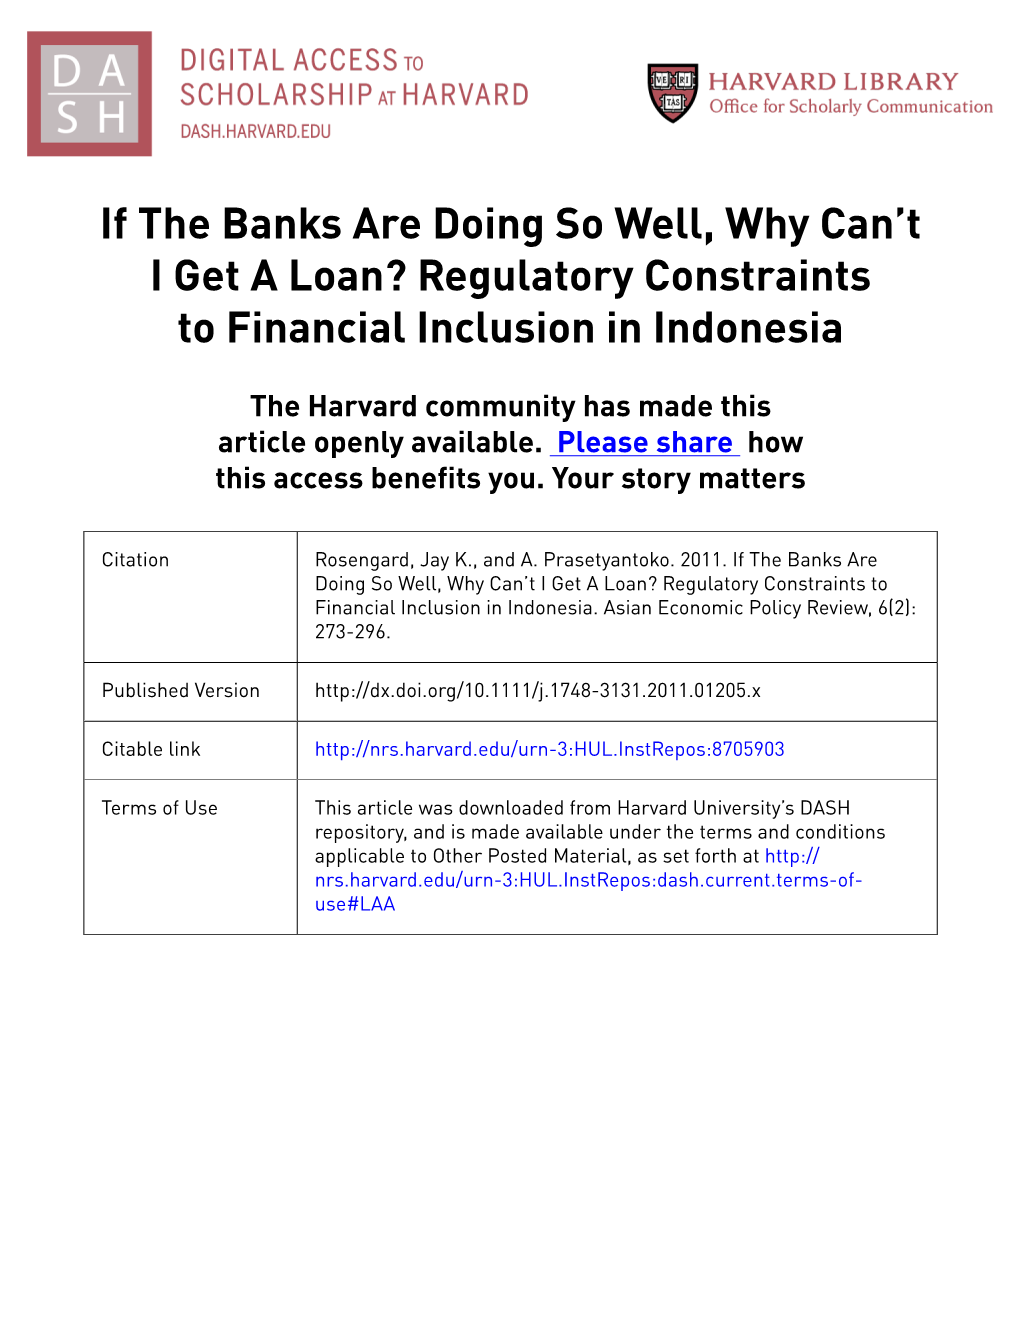 If the Banks Are Doing So Well, Why Can't I Get a Loan? Regulatory Constraints to Financial Inclusion in Indonesia